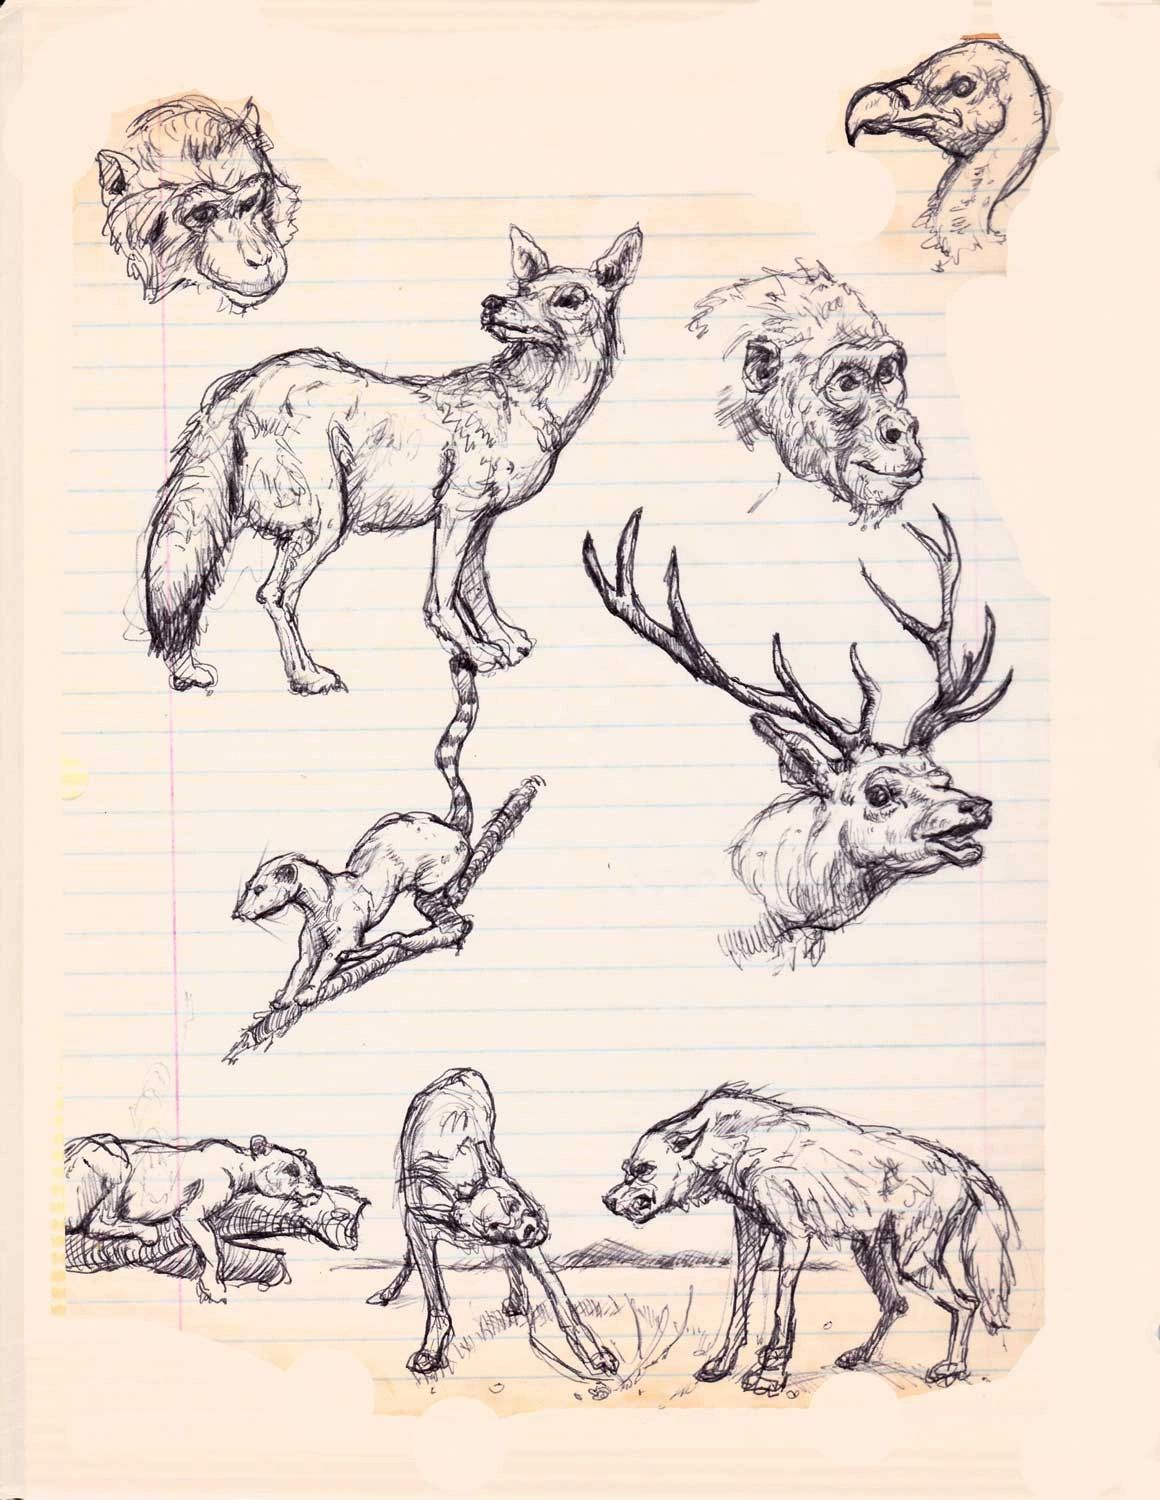 Animal sketches done at Chicago Field Museum